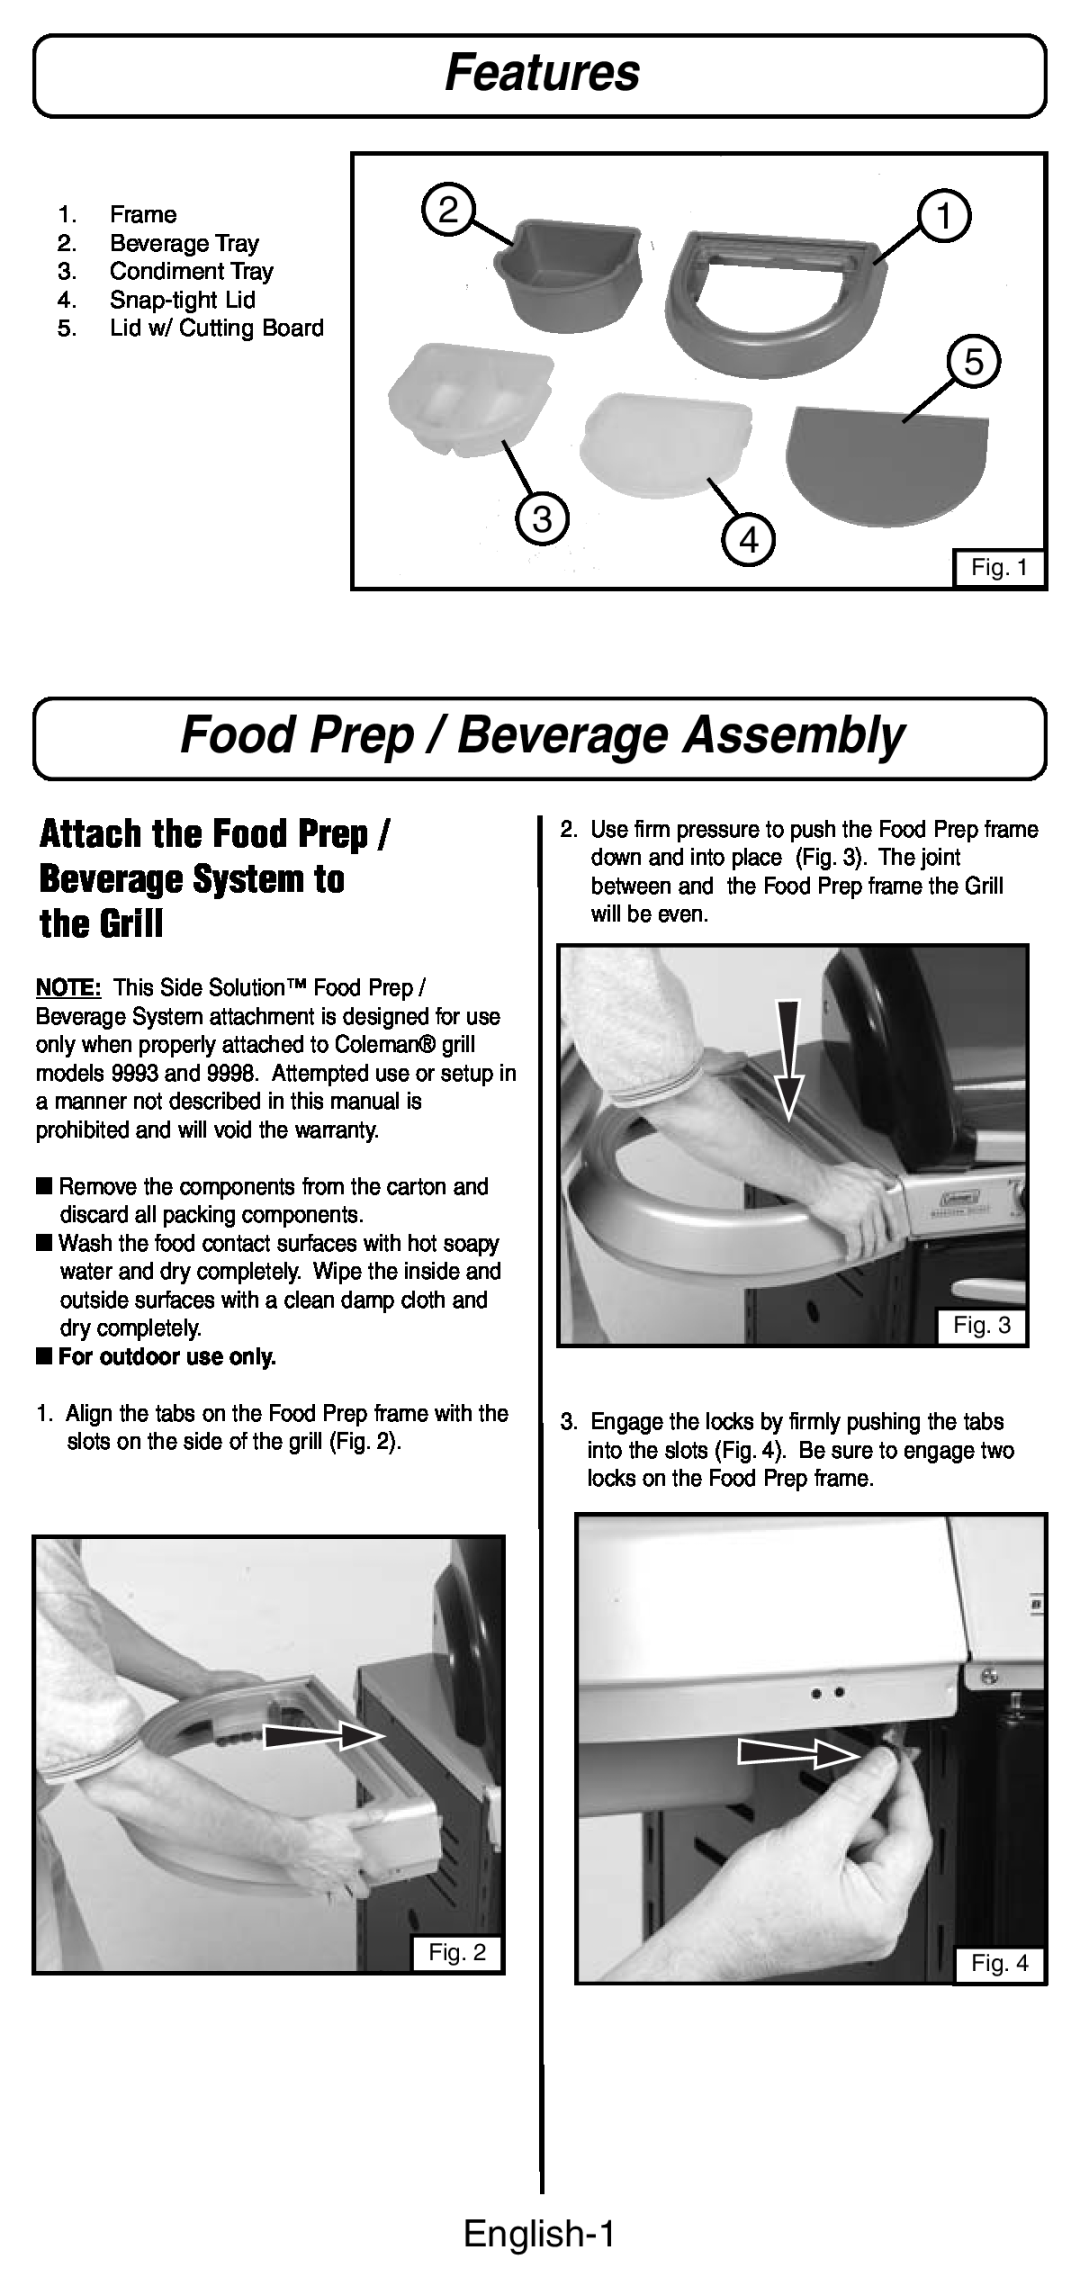 Coleman 9989 Features, Food Prep / Beverage Assembly, Attach the Food Prep / Beverage System to the Grill, English-1 